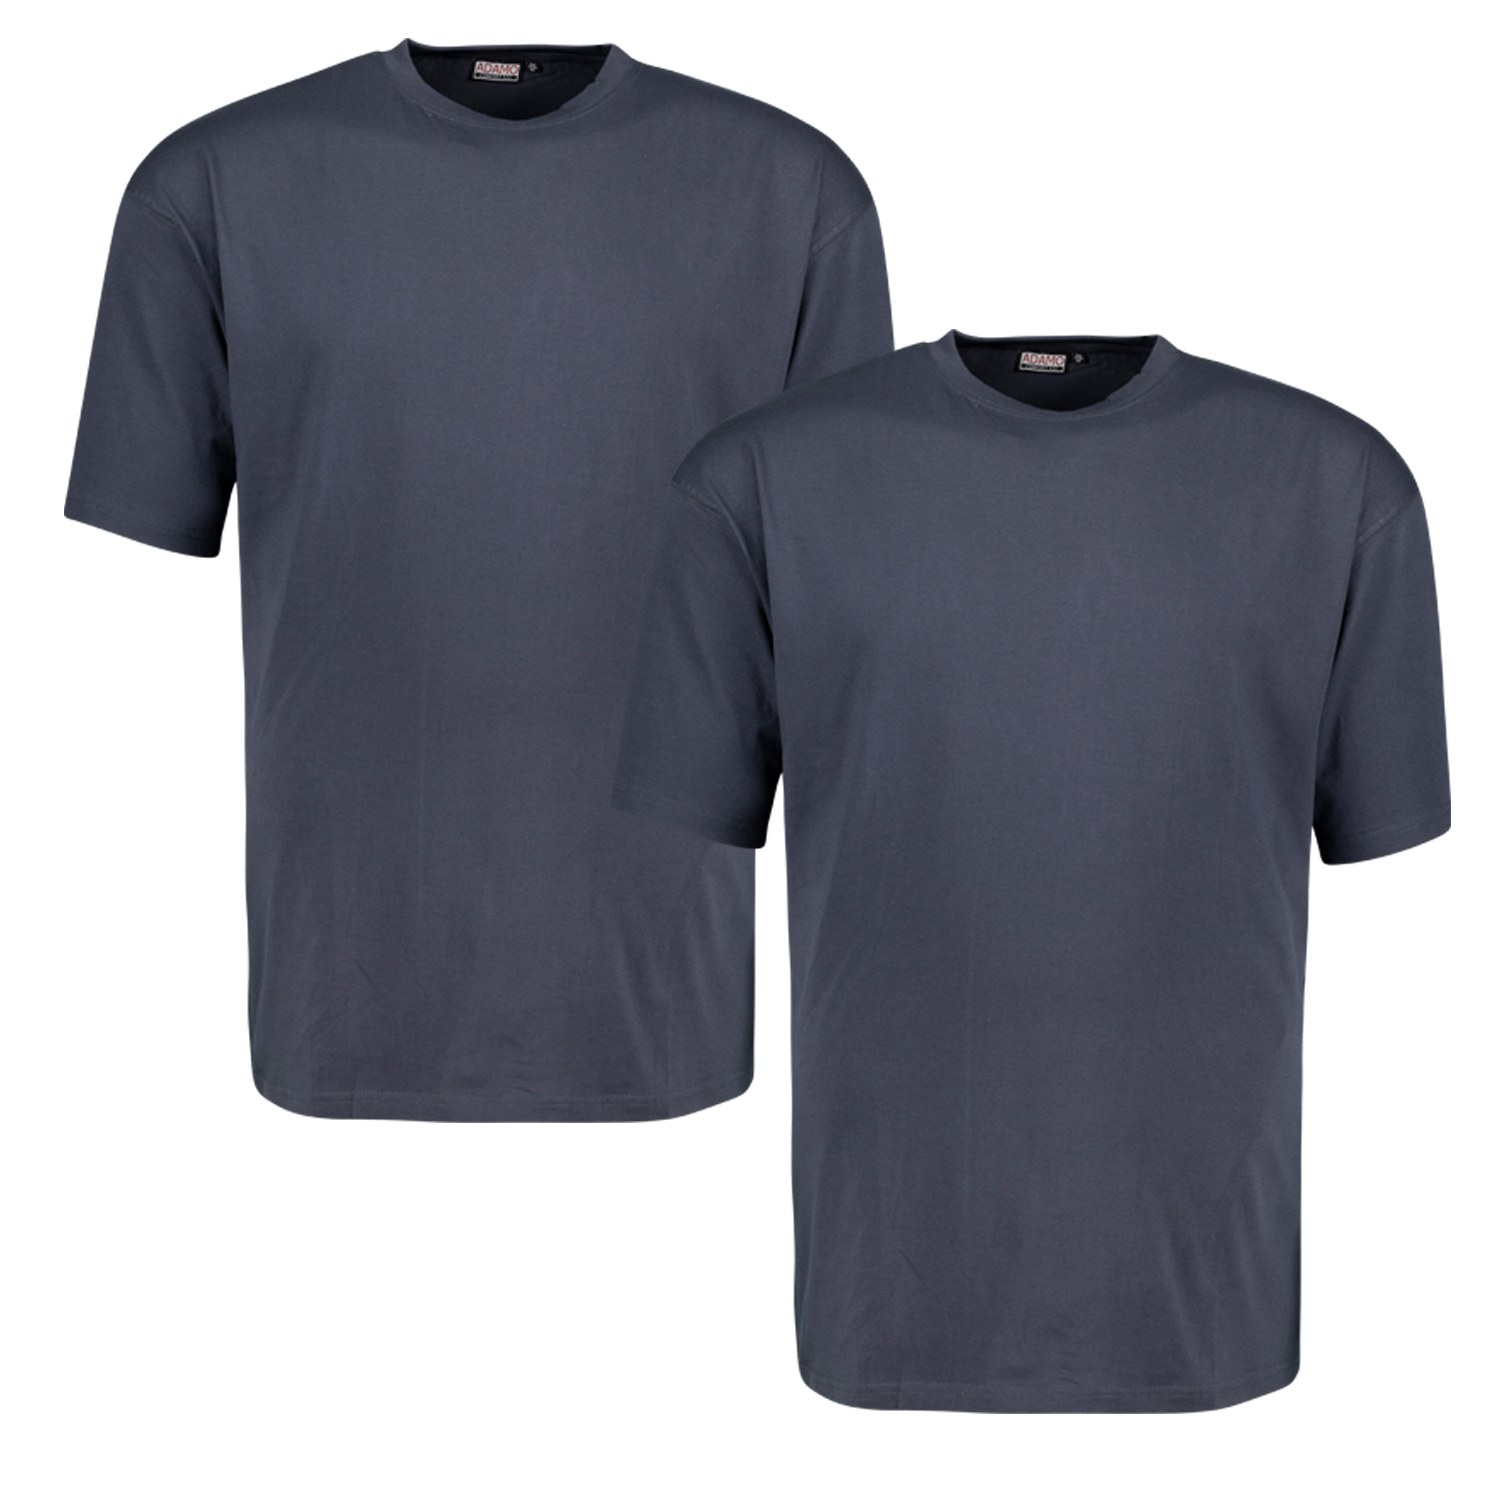 Double pack COMFORT FIT dark grey MARLON t-shirt by ADAMO up to kingsize 12XL